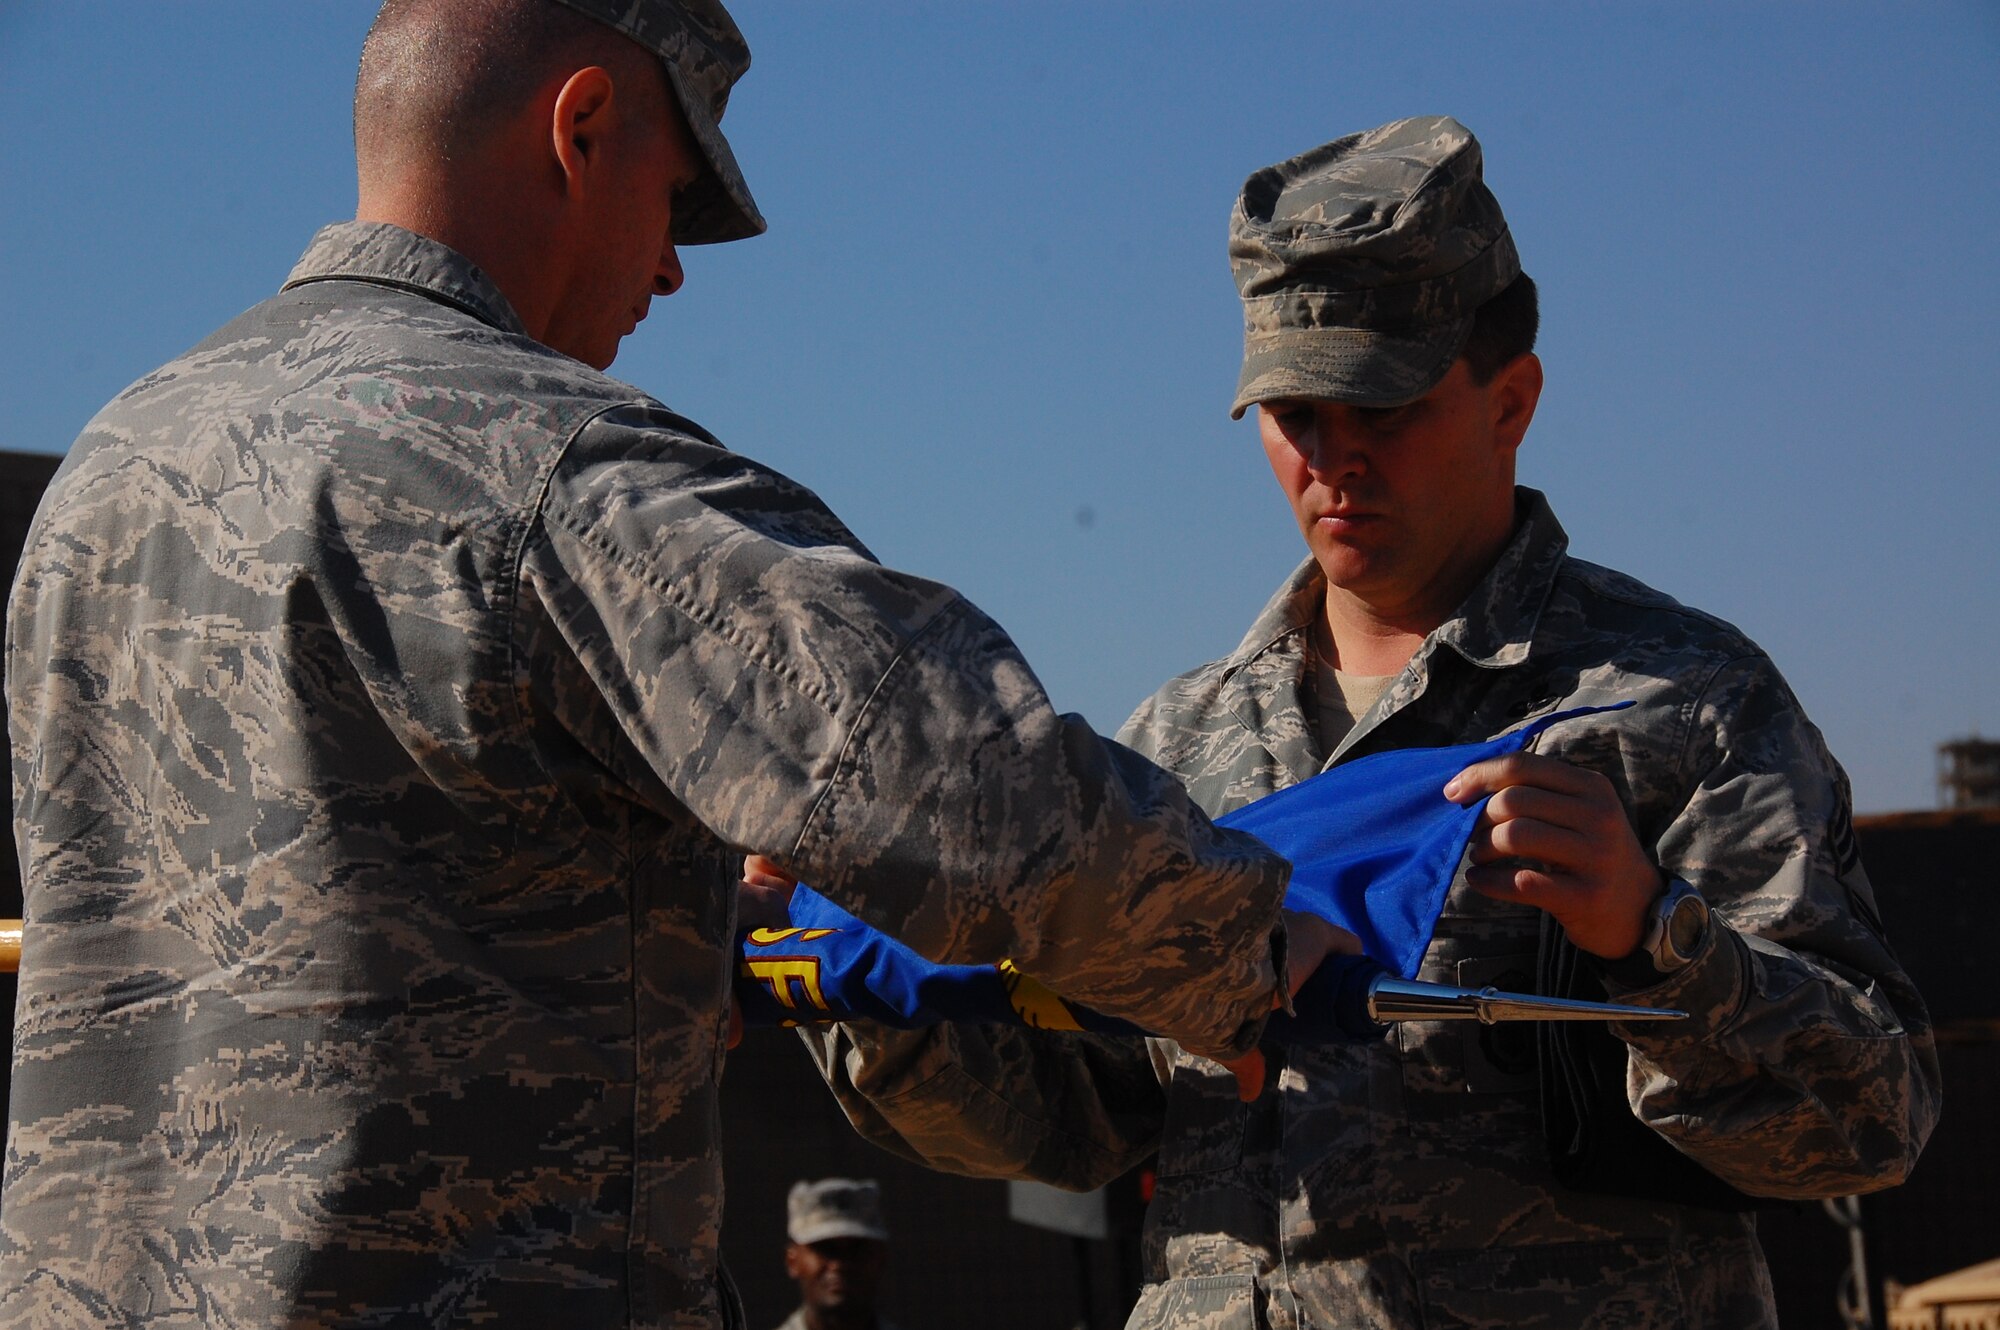 CAMP BUCCA, Iraq -- Maj. Larry Wood, 887th Expeditionary Security Forces Squadron commander, left, and Chief Master Sgt. James Johnson, furl the 887th ESFS guidon during the squadron’s deactivation ceremony Dec. 3.  (U.S. Air Force photo/Staff Sgt. Shaun Emery)